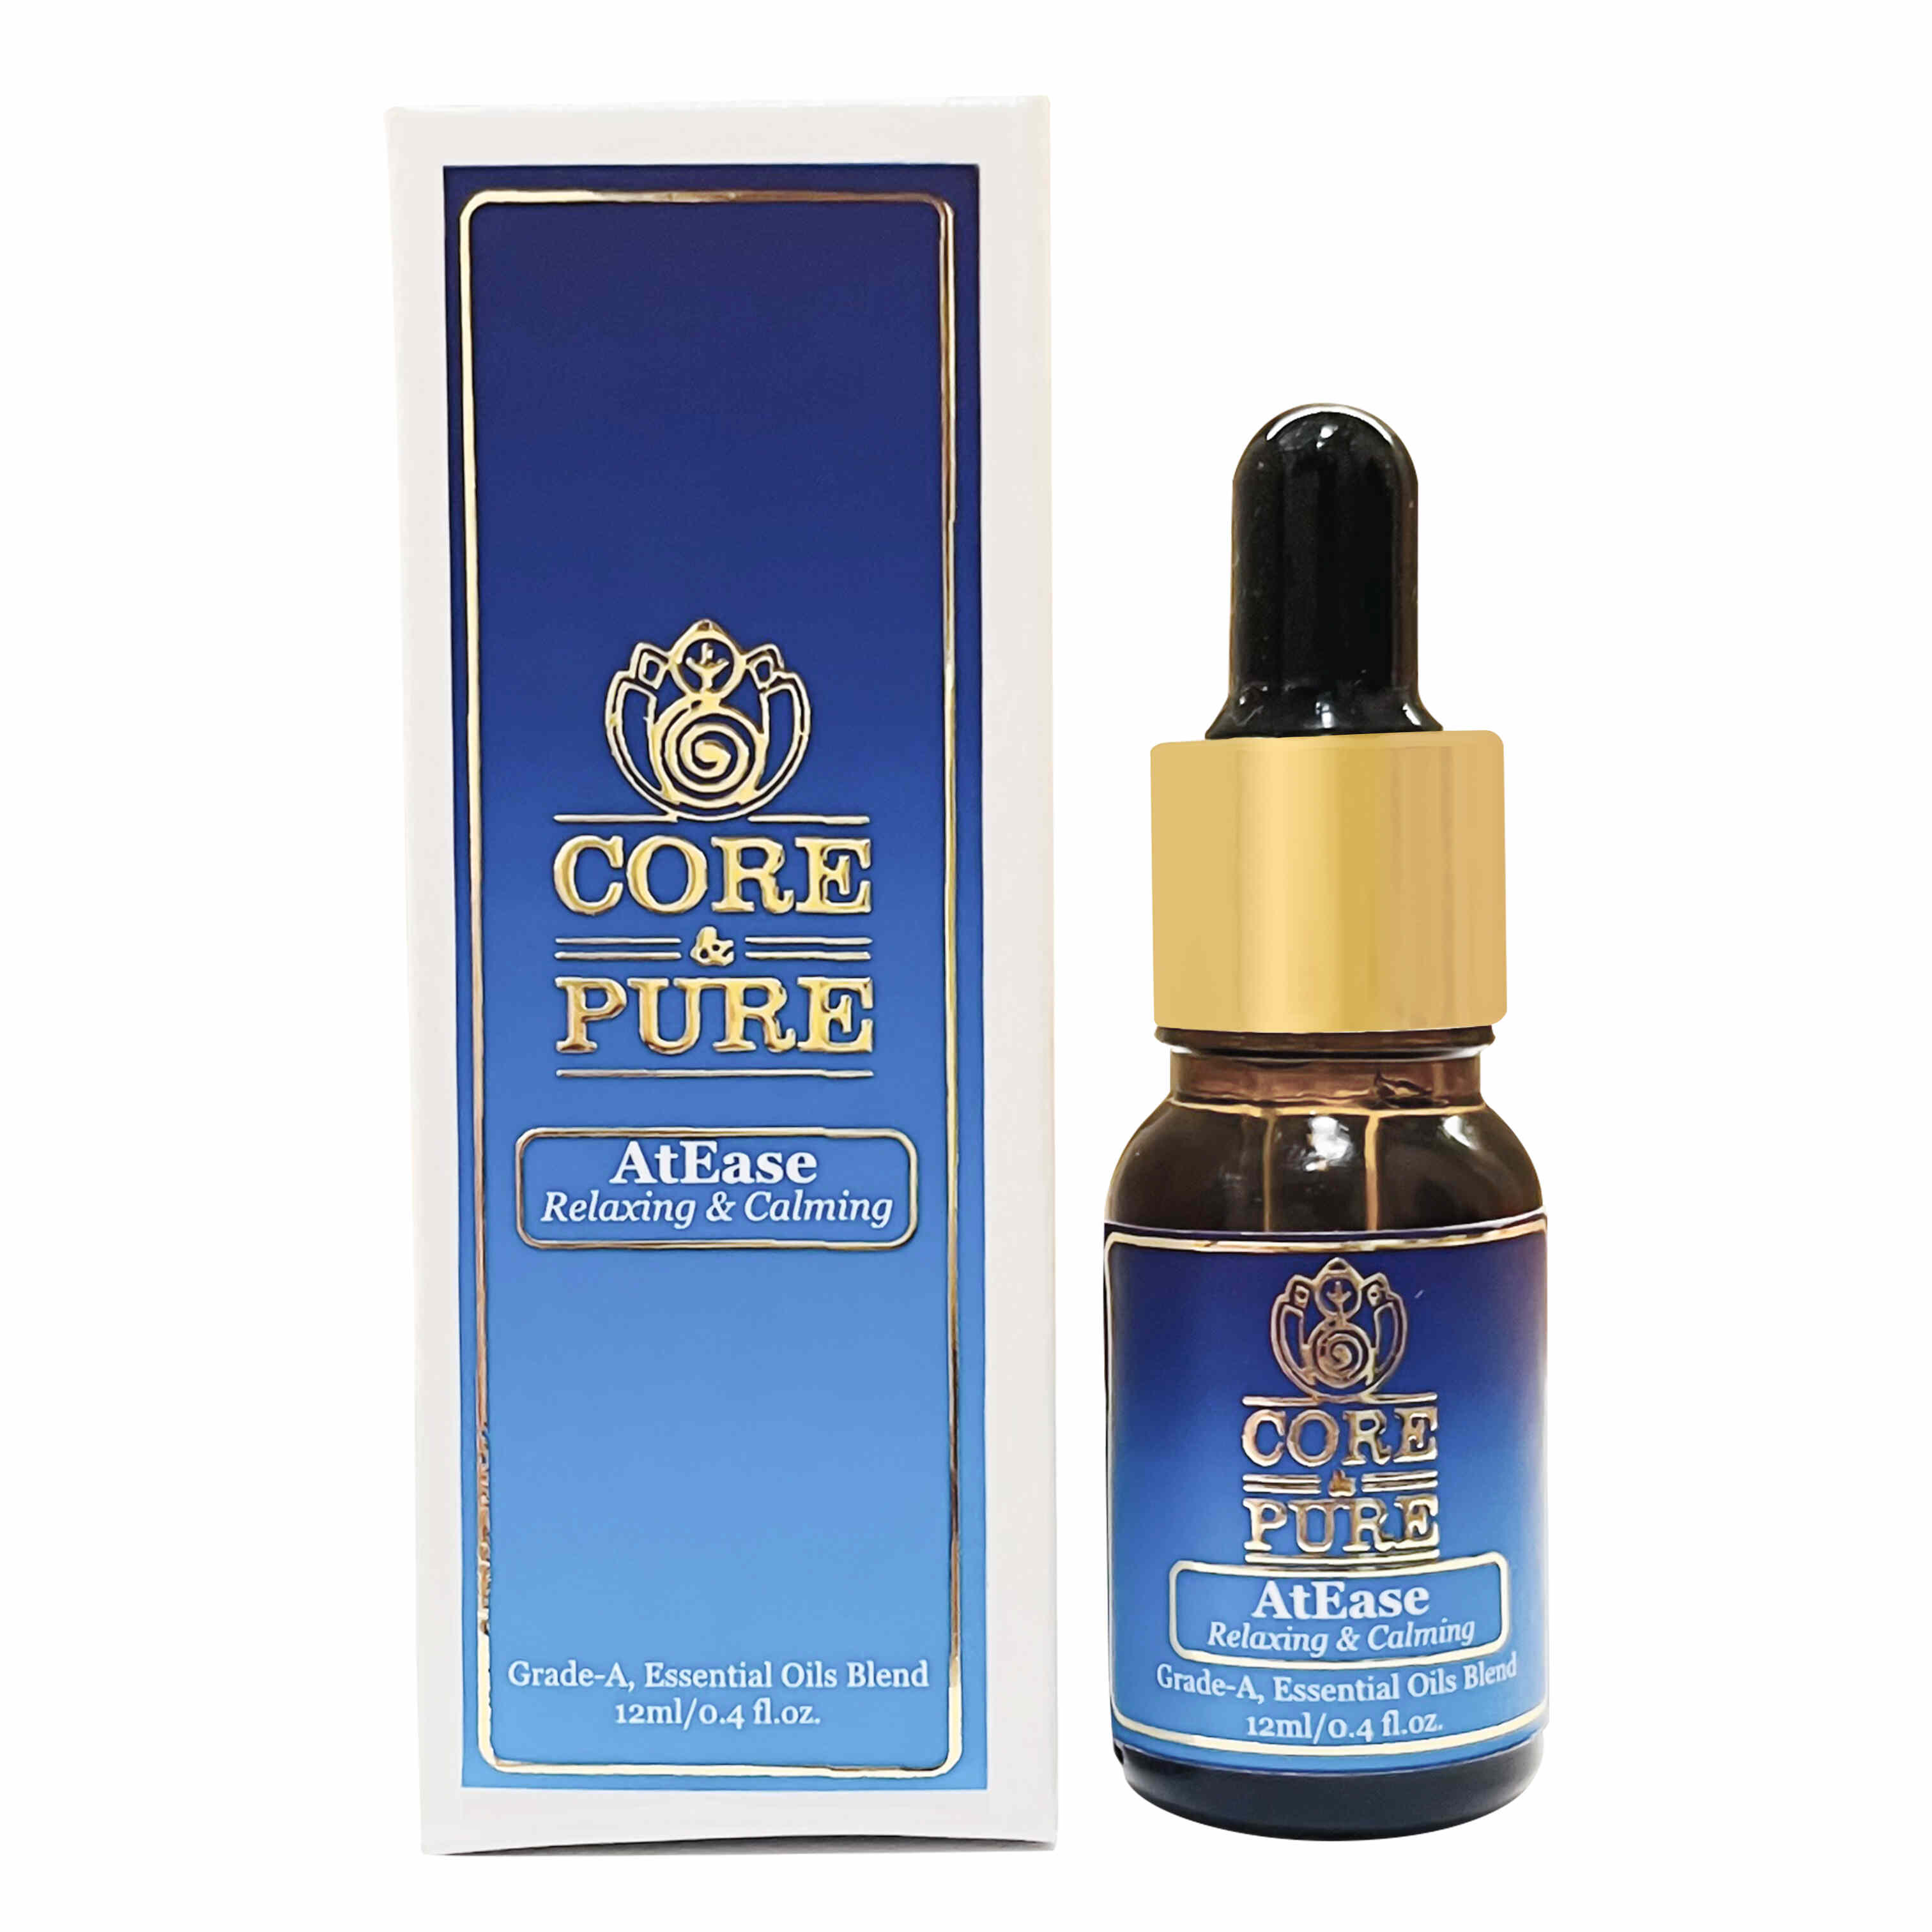 Atease-relaxing-calming-essential-oil